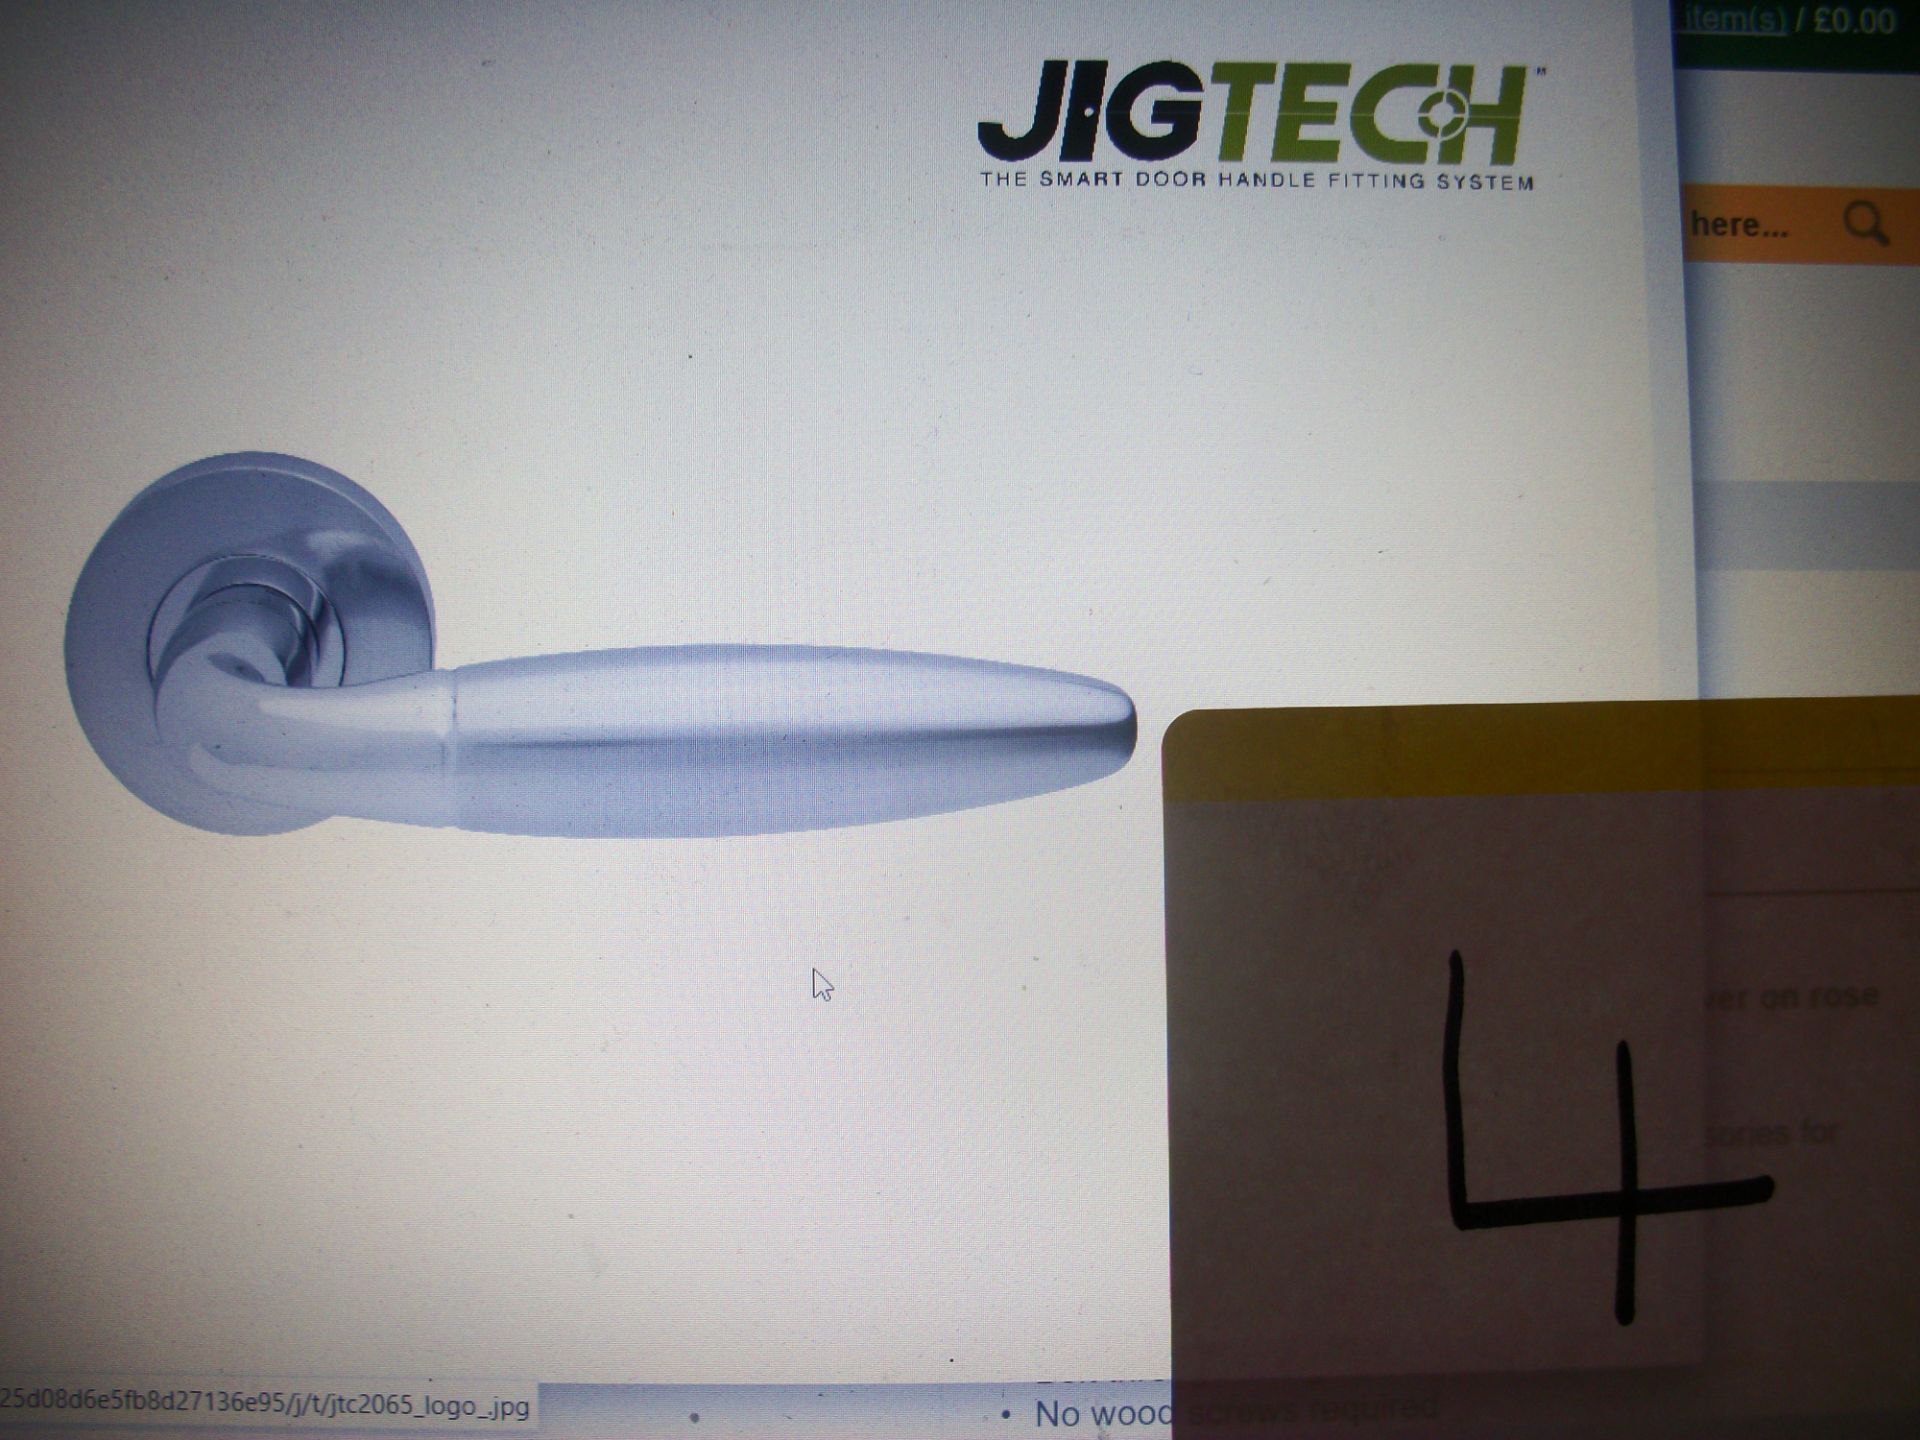 2 Pair Jigtech Parma Polished/Satin Chrome Handles - Image 2 of 2